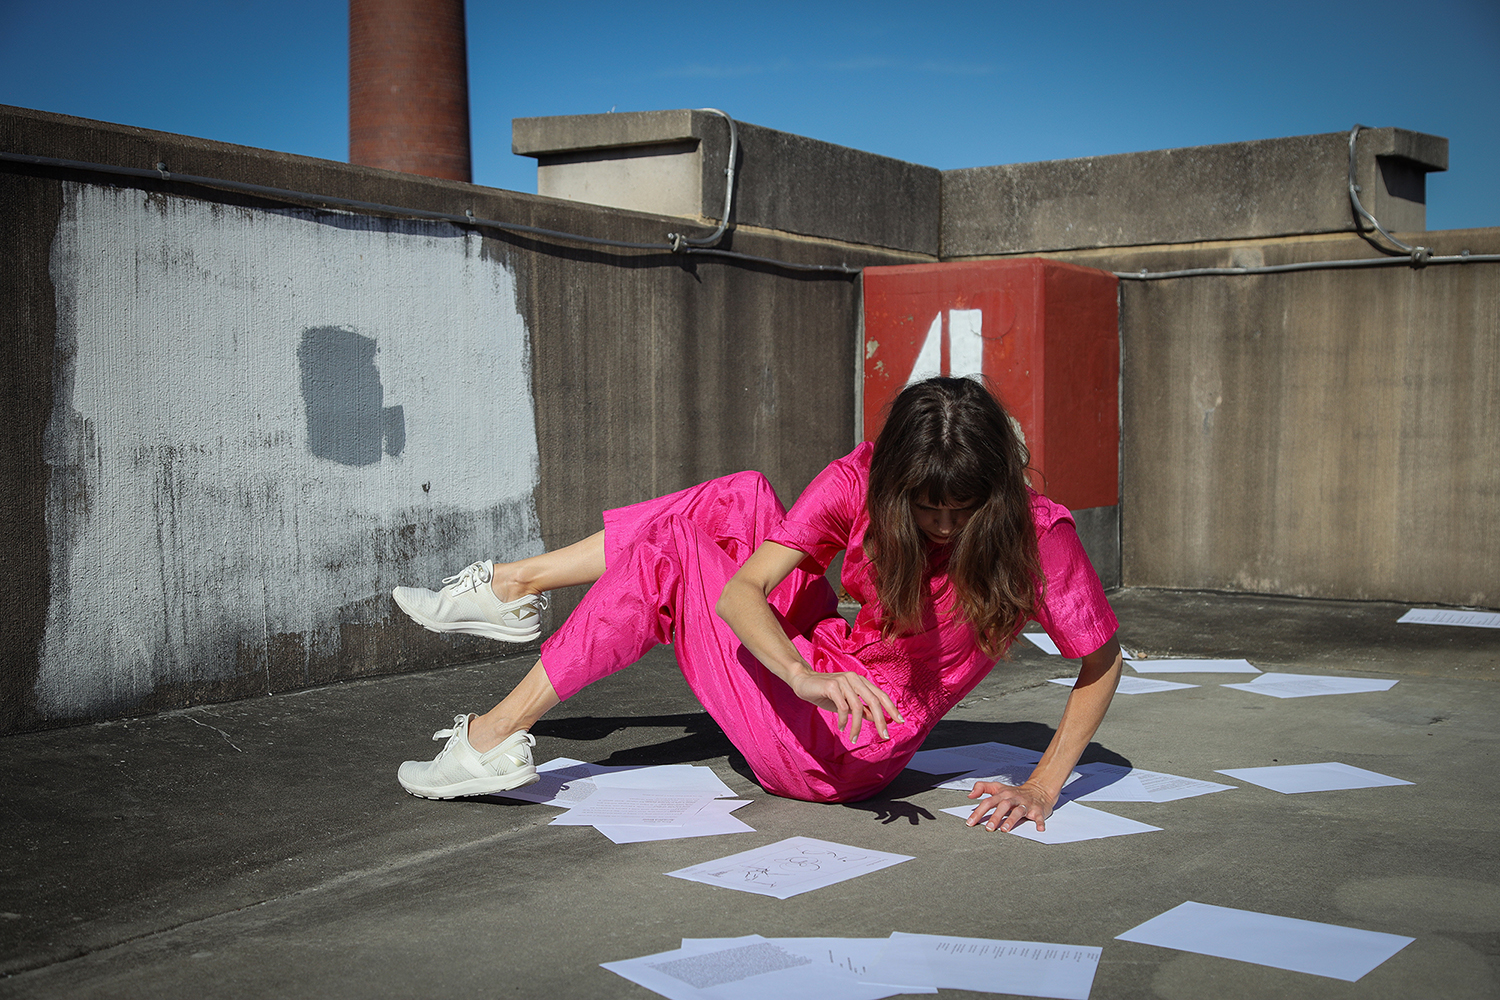 Person with long brown hair, wearing a pink jumpsuit and white sneakers, sustains a position in the corner of a concrete parking garage with papers strewn about. 